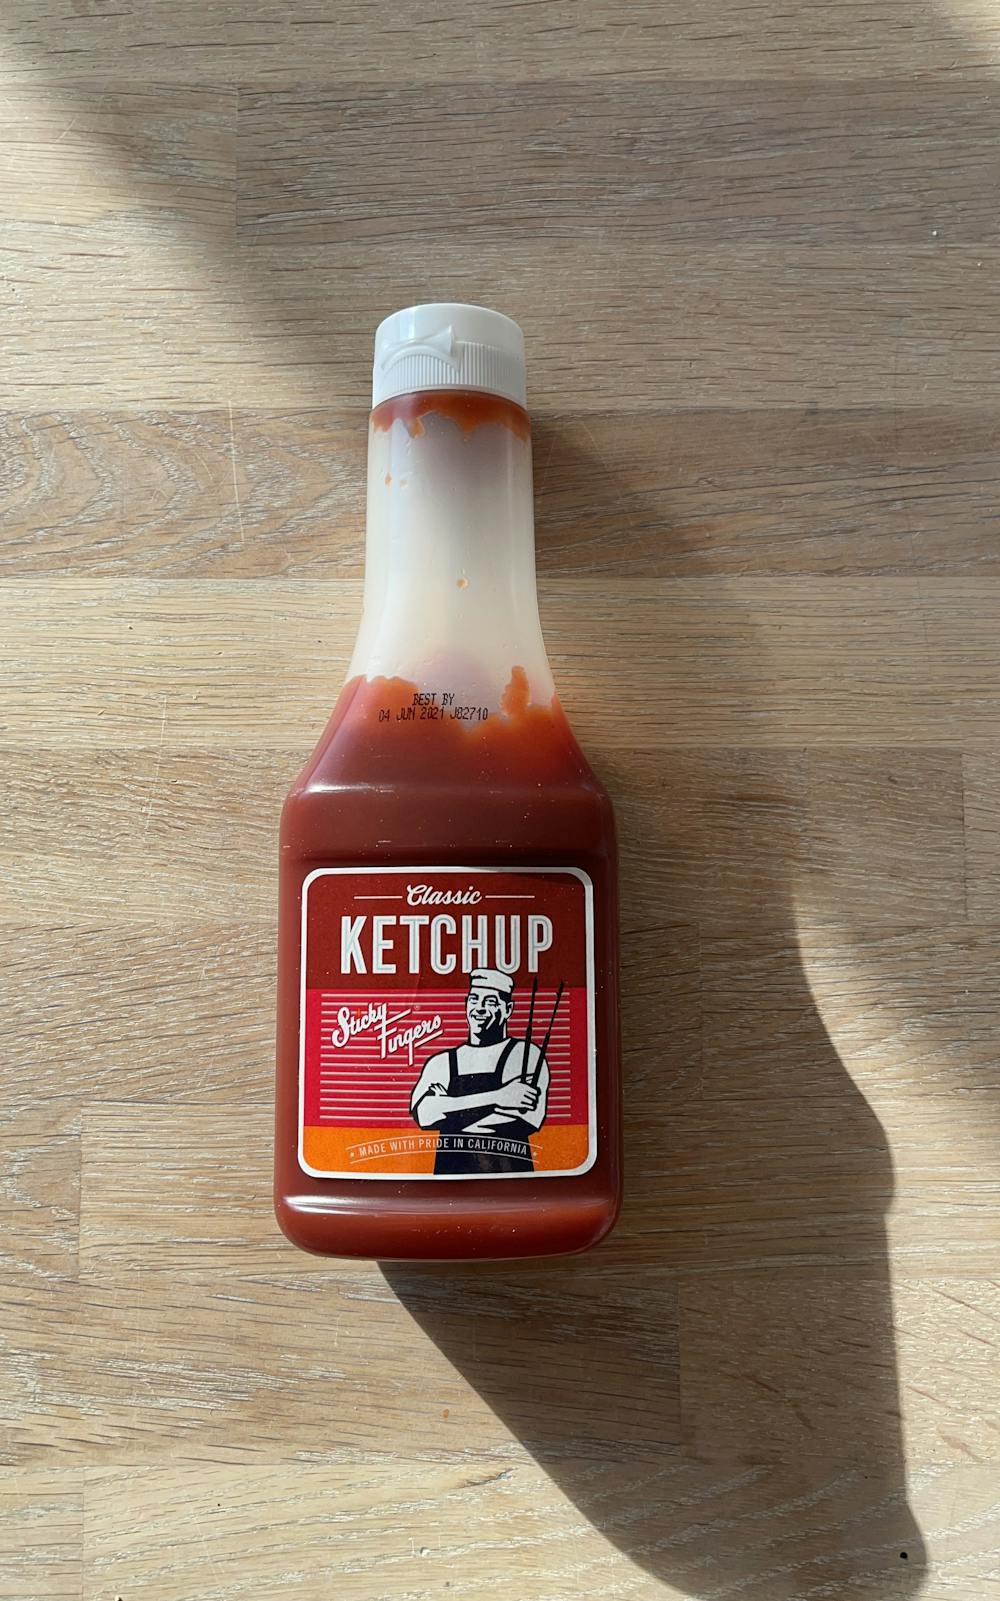 Classic ketchup, Sticky fingers